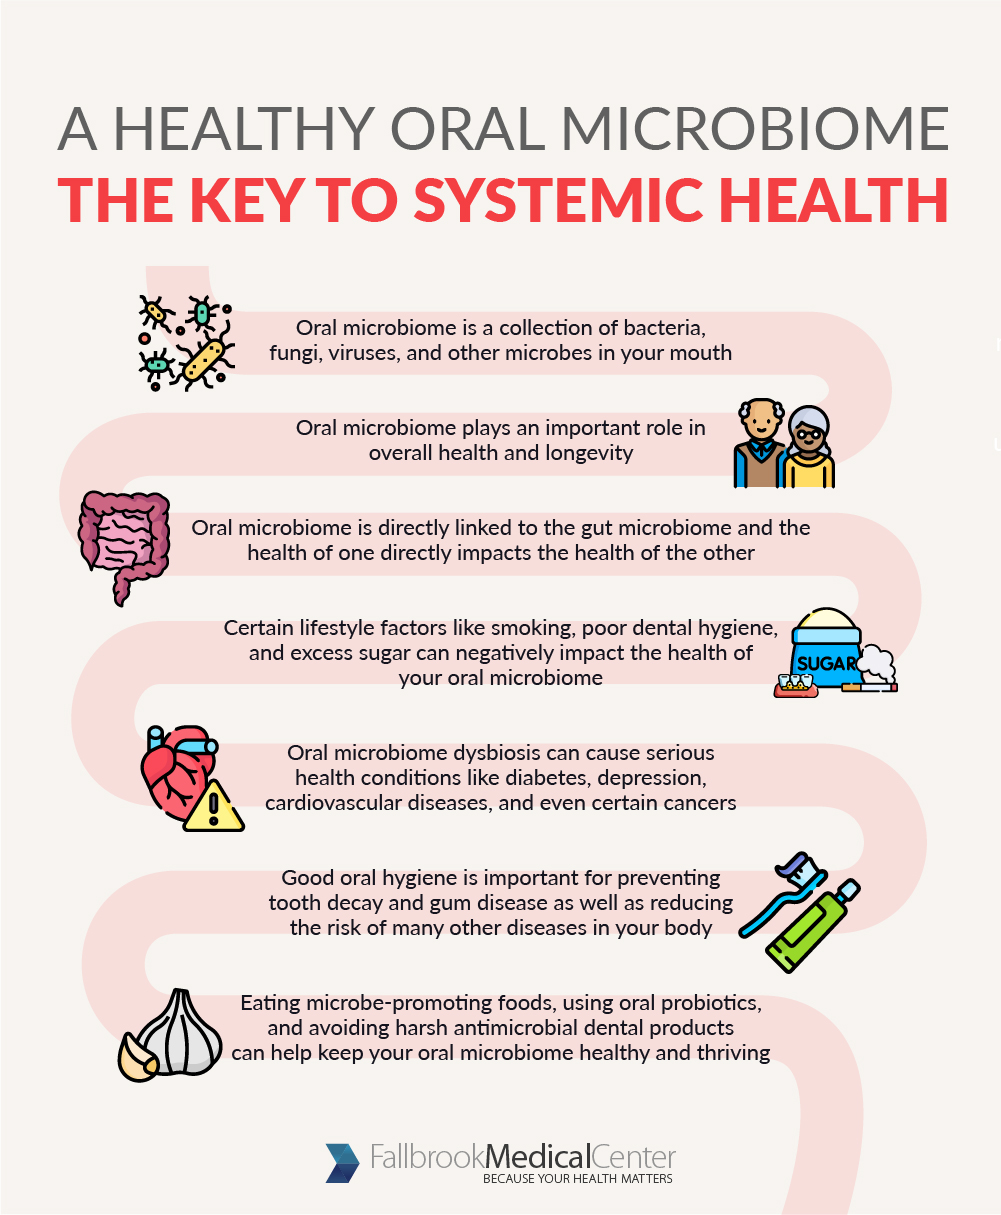 A Healthy Oral Microbiome - The Key to Systemic Health